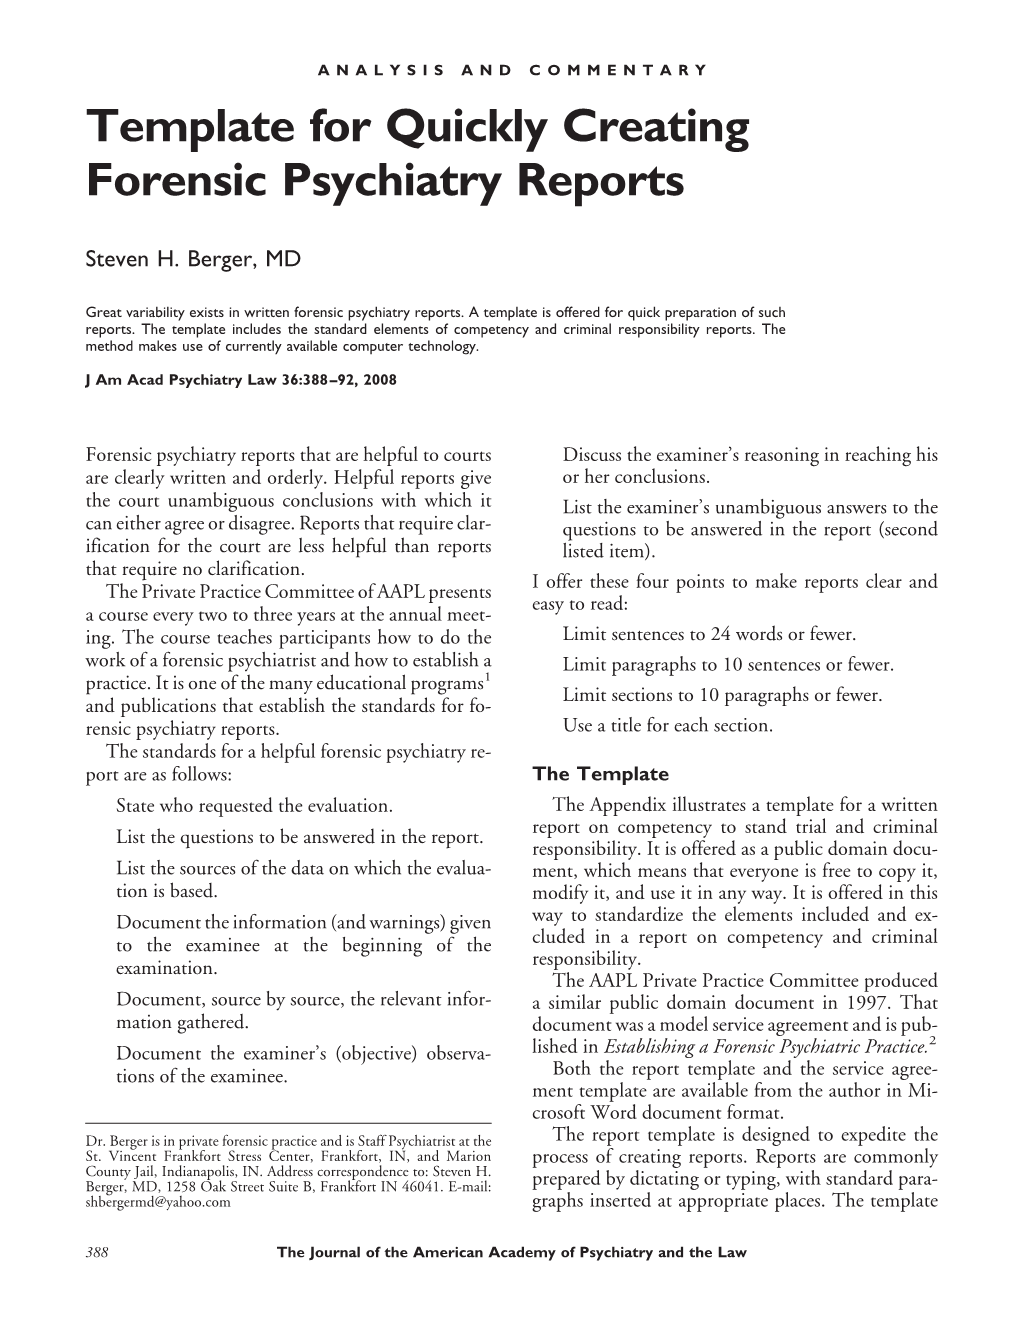 Template for Quickly Creating Forensic Psychiatry Reports